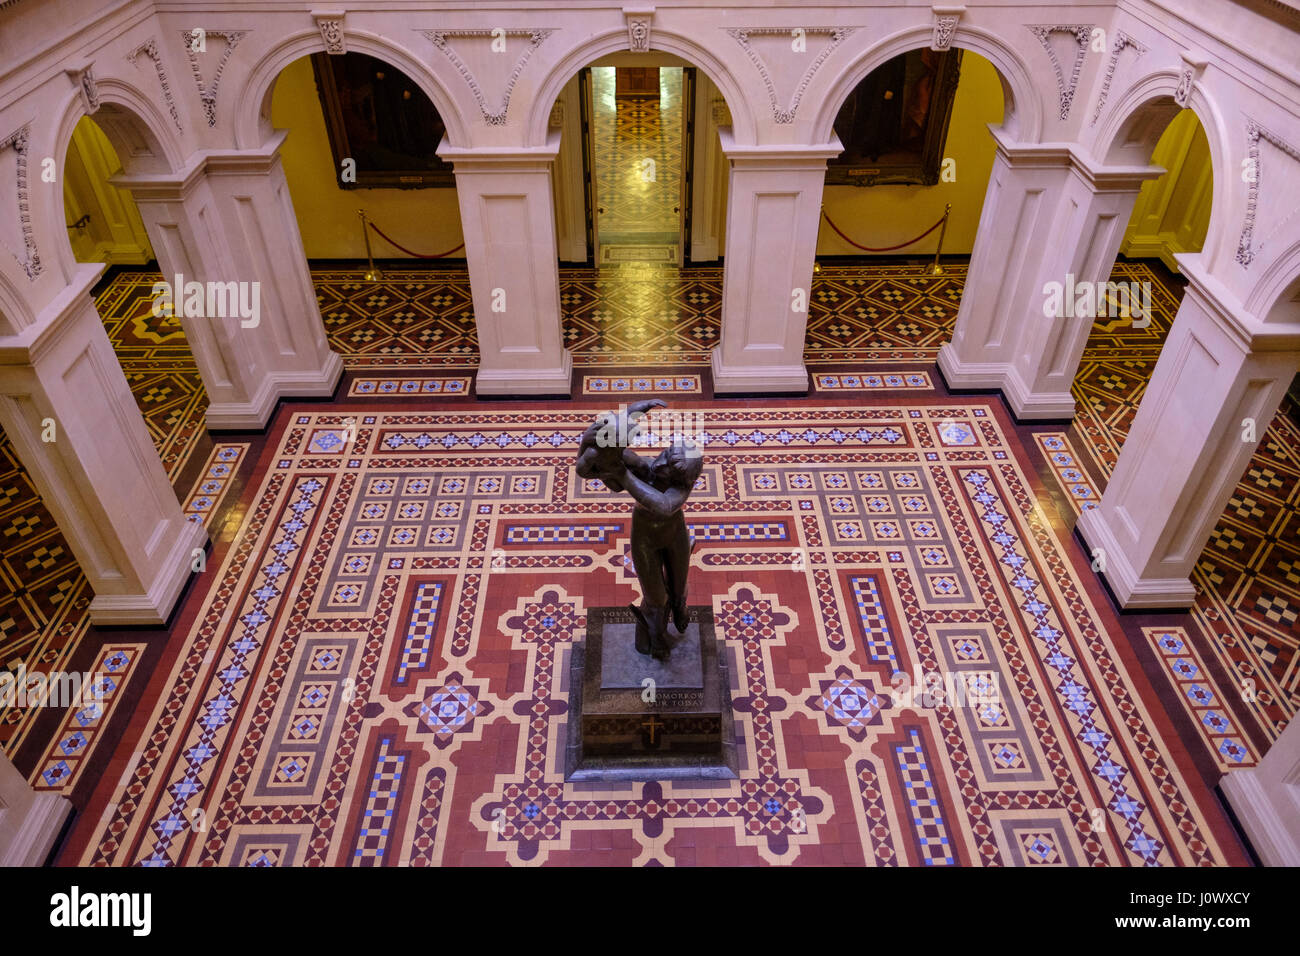 Osgoode Hall rotunda, view from above, Cleeve Horne statue, The World War Two memorial, colourful floor tiles, Atrium, Toronto, Ontario, Canada. Stock Photo